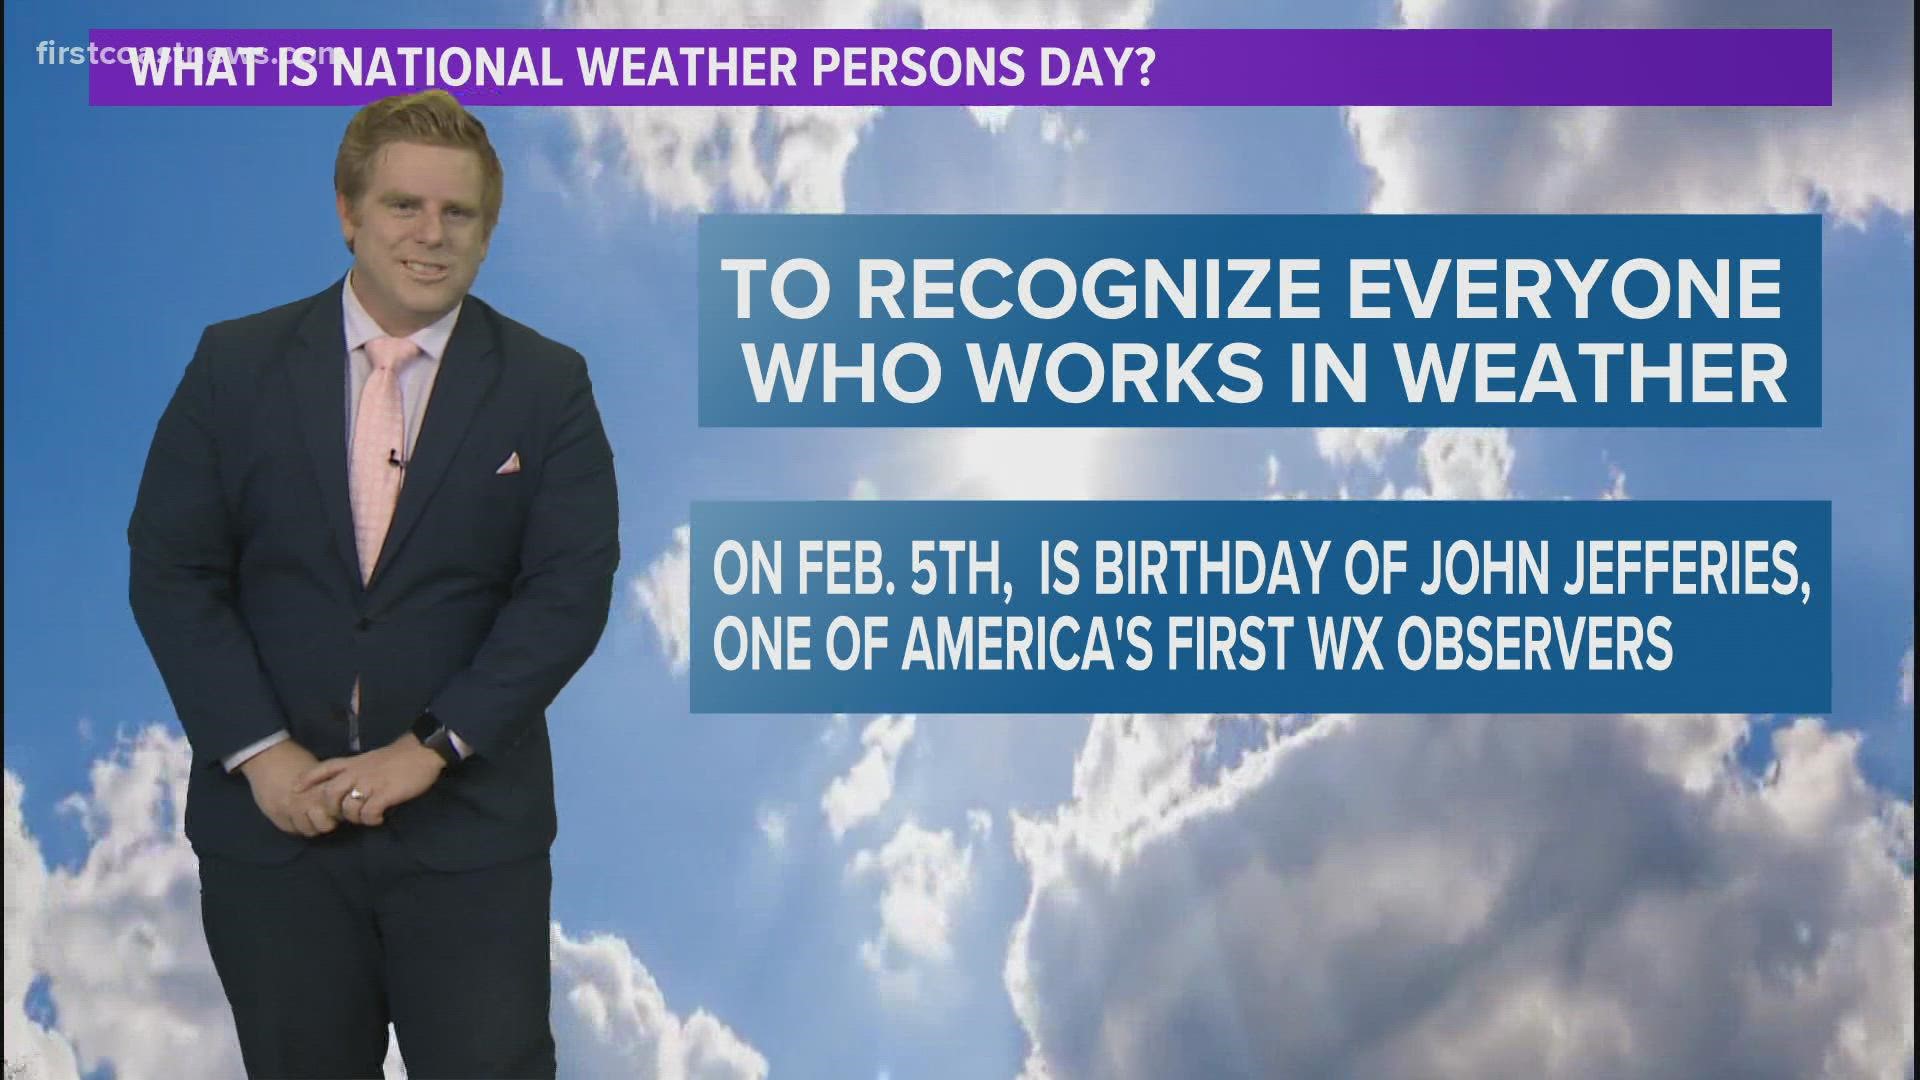 What is National Weatherperson's day?